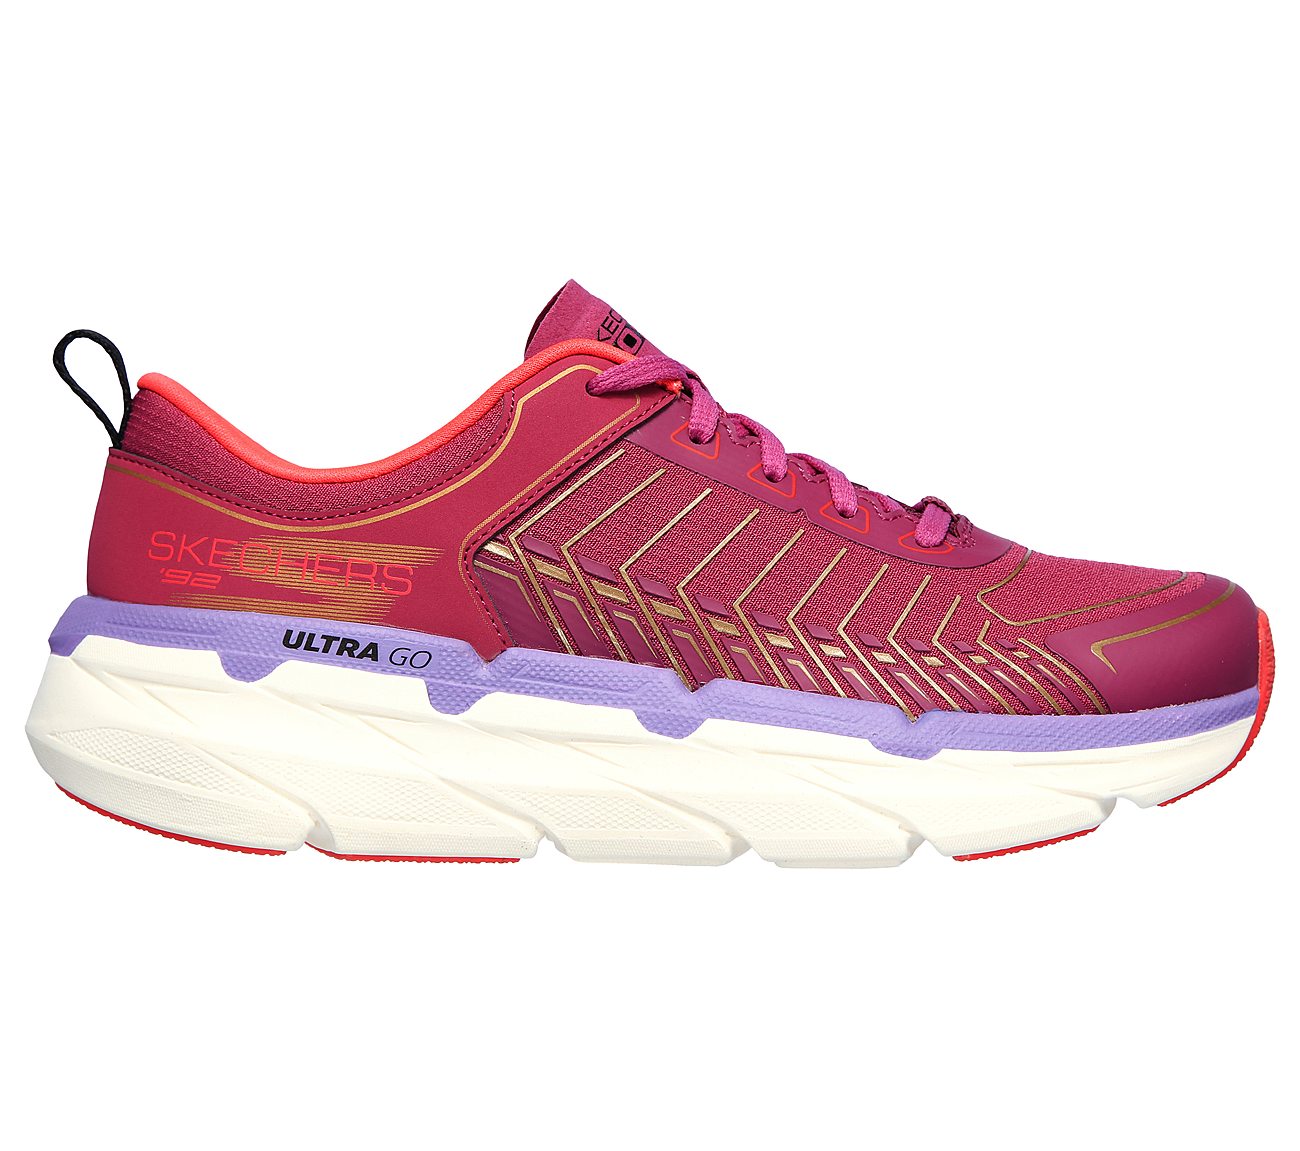 MAX CUSHIONING PREMIER-FAST A, RASPBERRY Footwear Lateral View